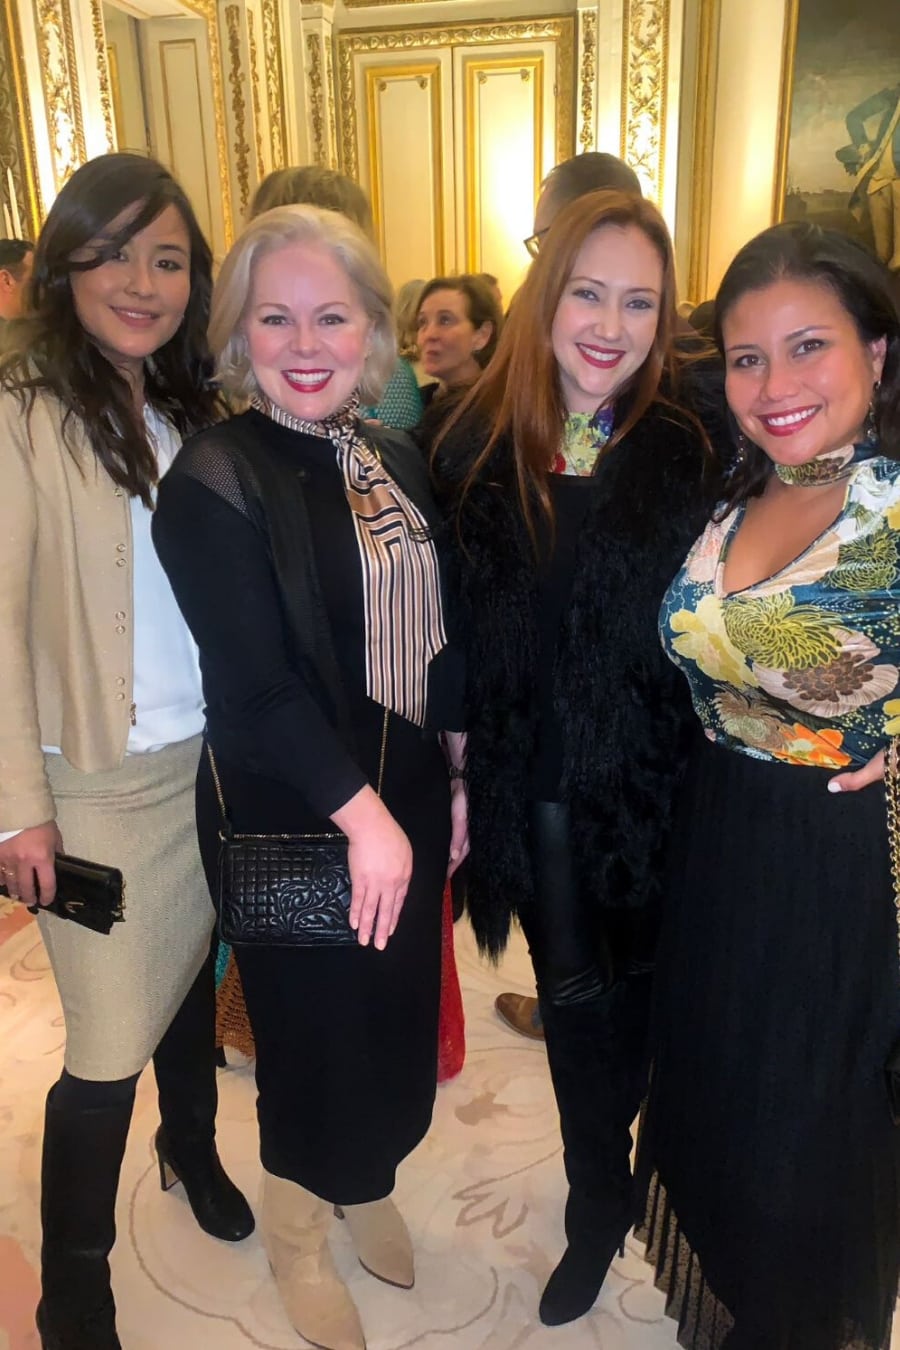 Janice Barta, Laura Umansky, Meredith Xavier, and Melissa Grove in Paris at the Perennials party